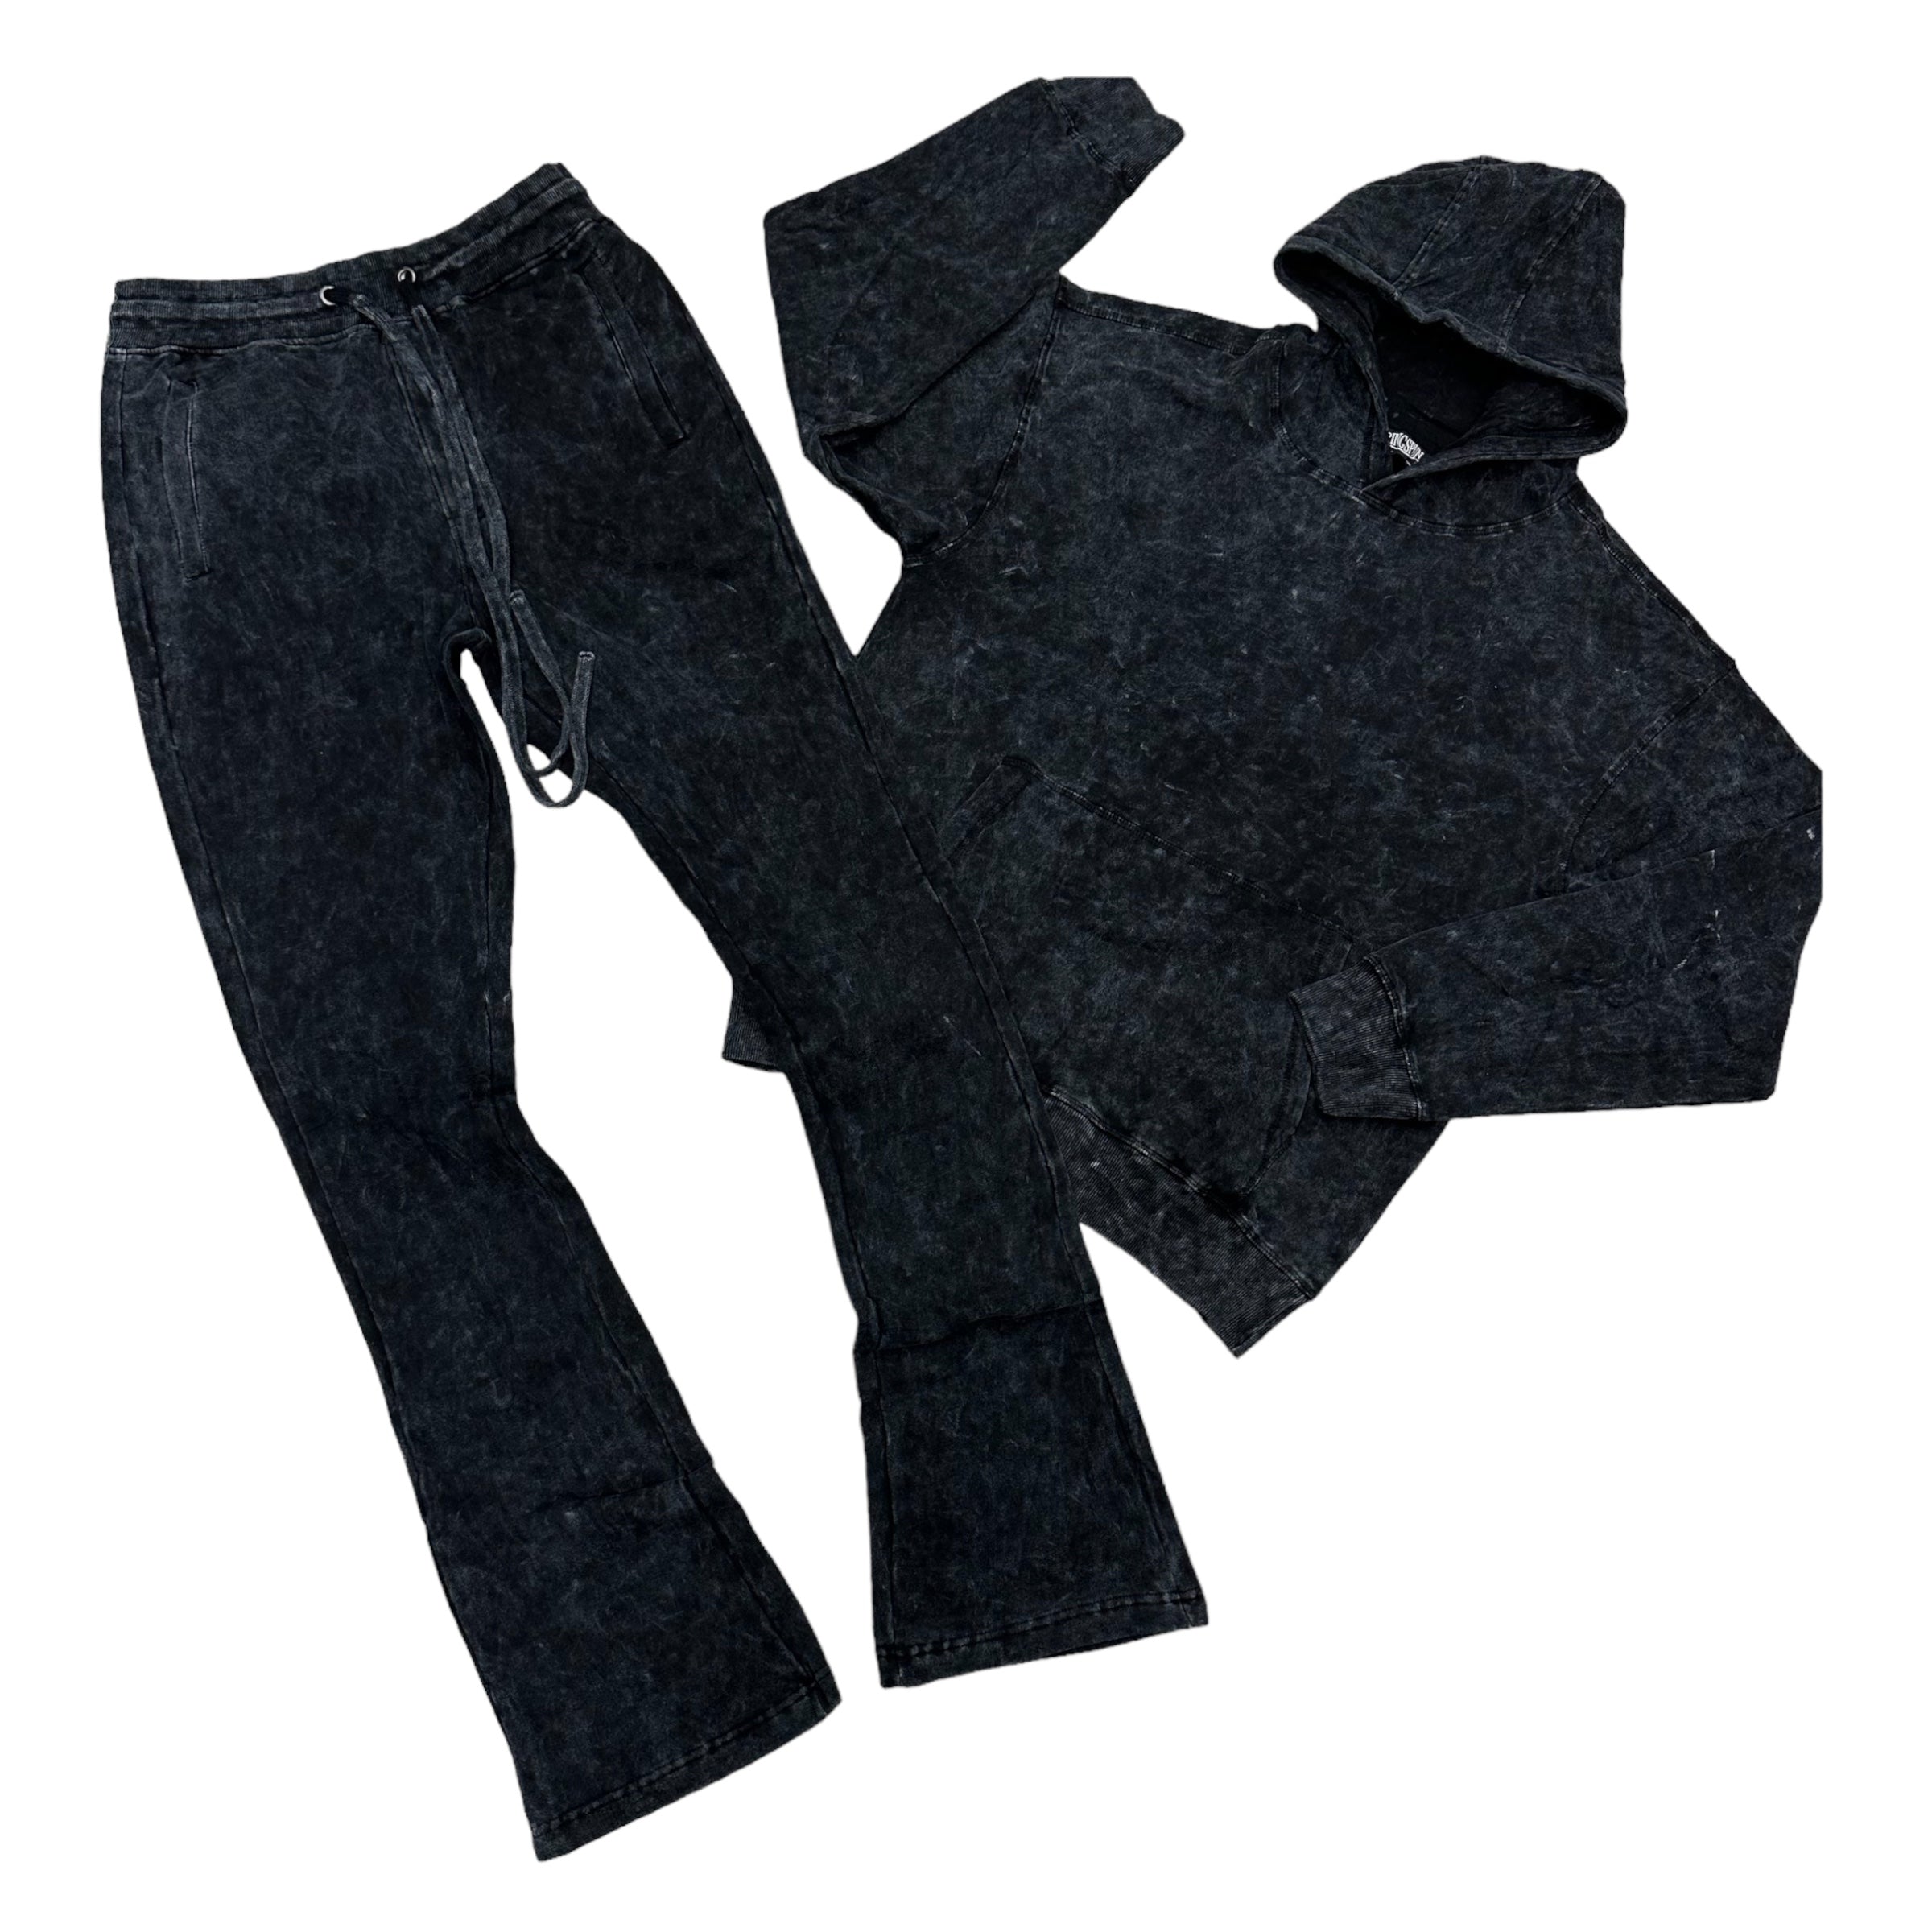 Rs Acid washed Stacked Pullover hoodie set Black 301 401